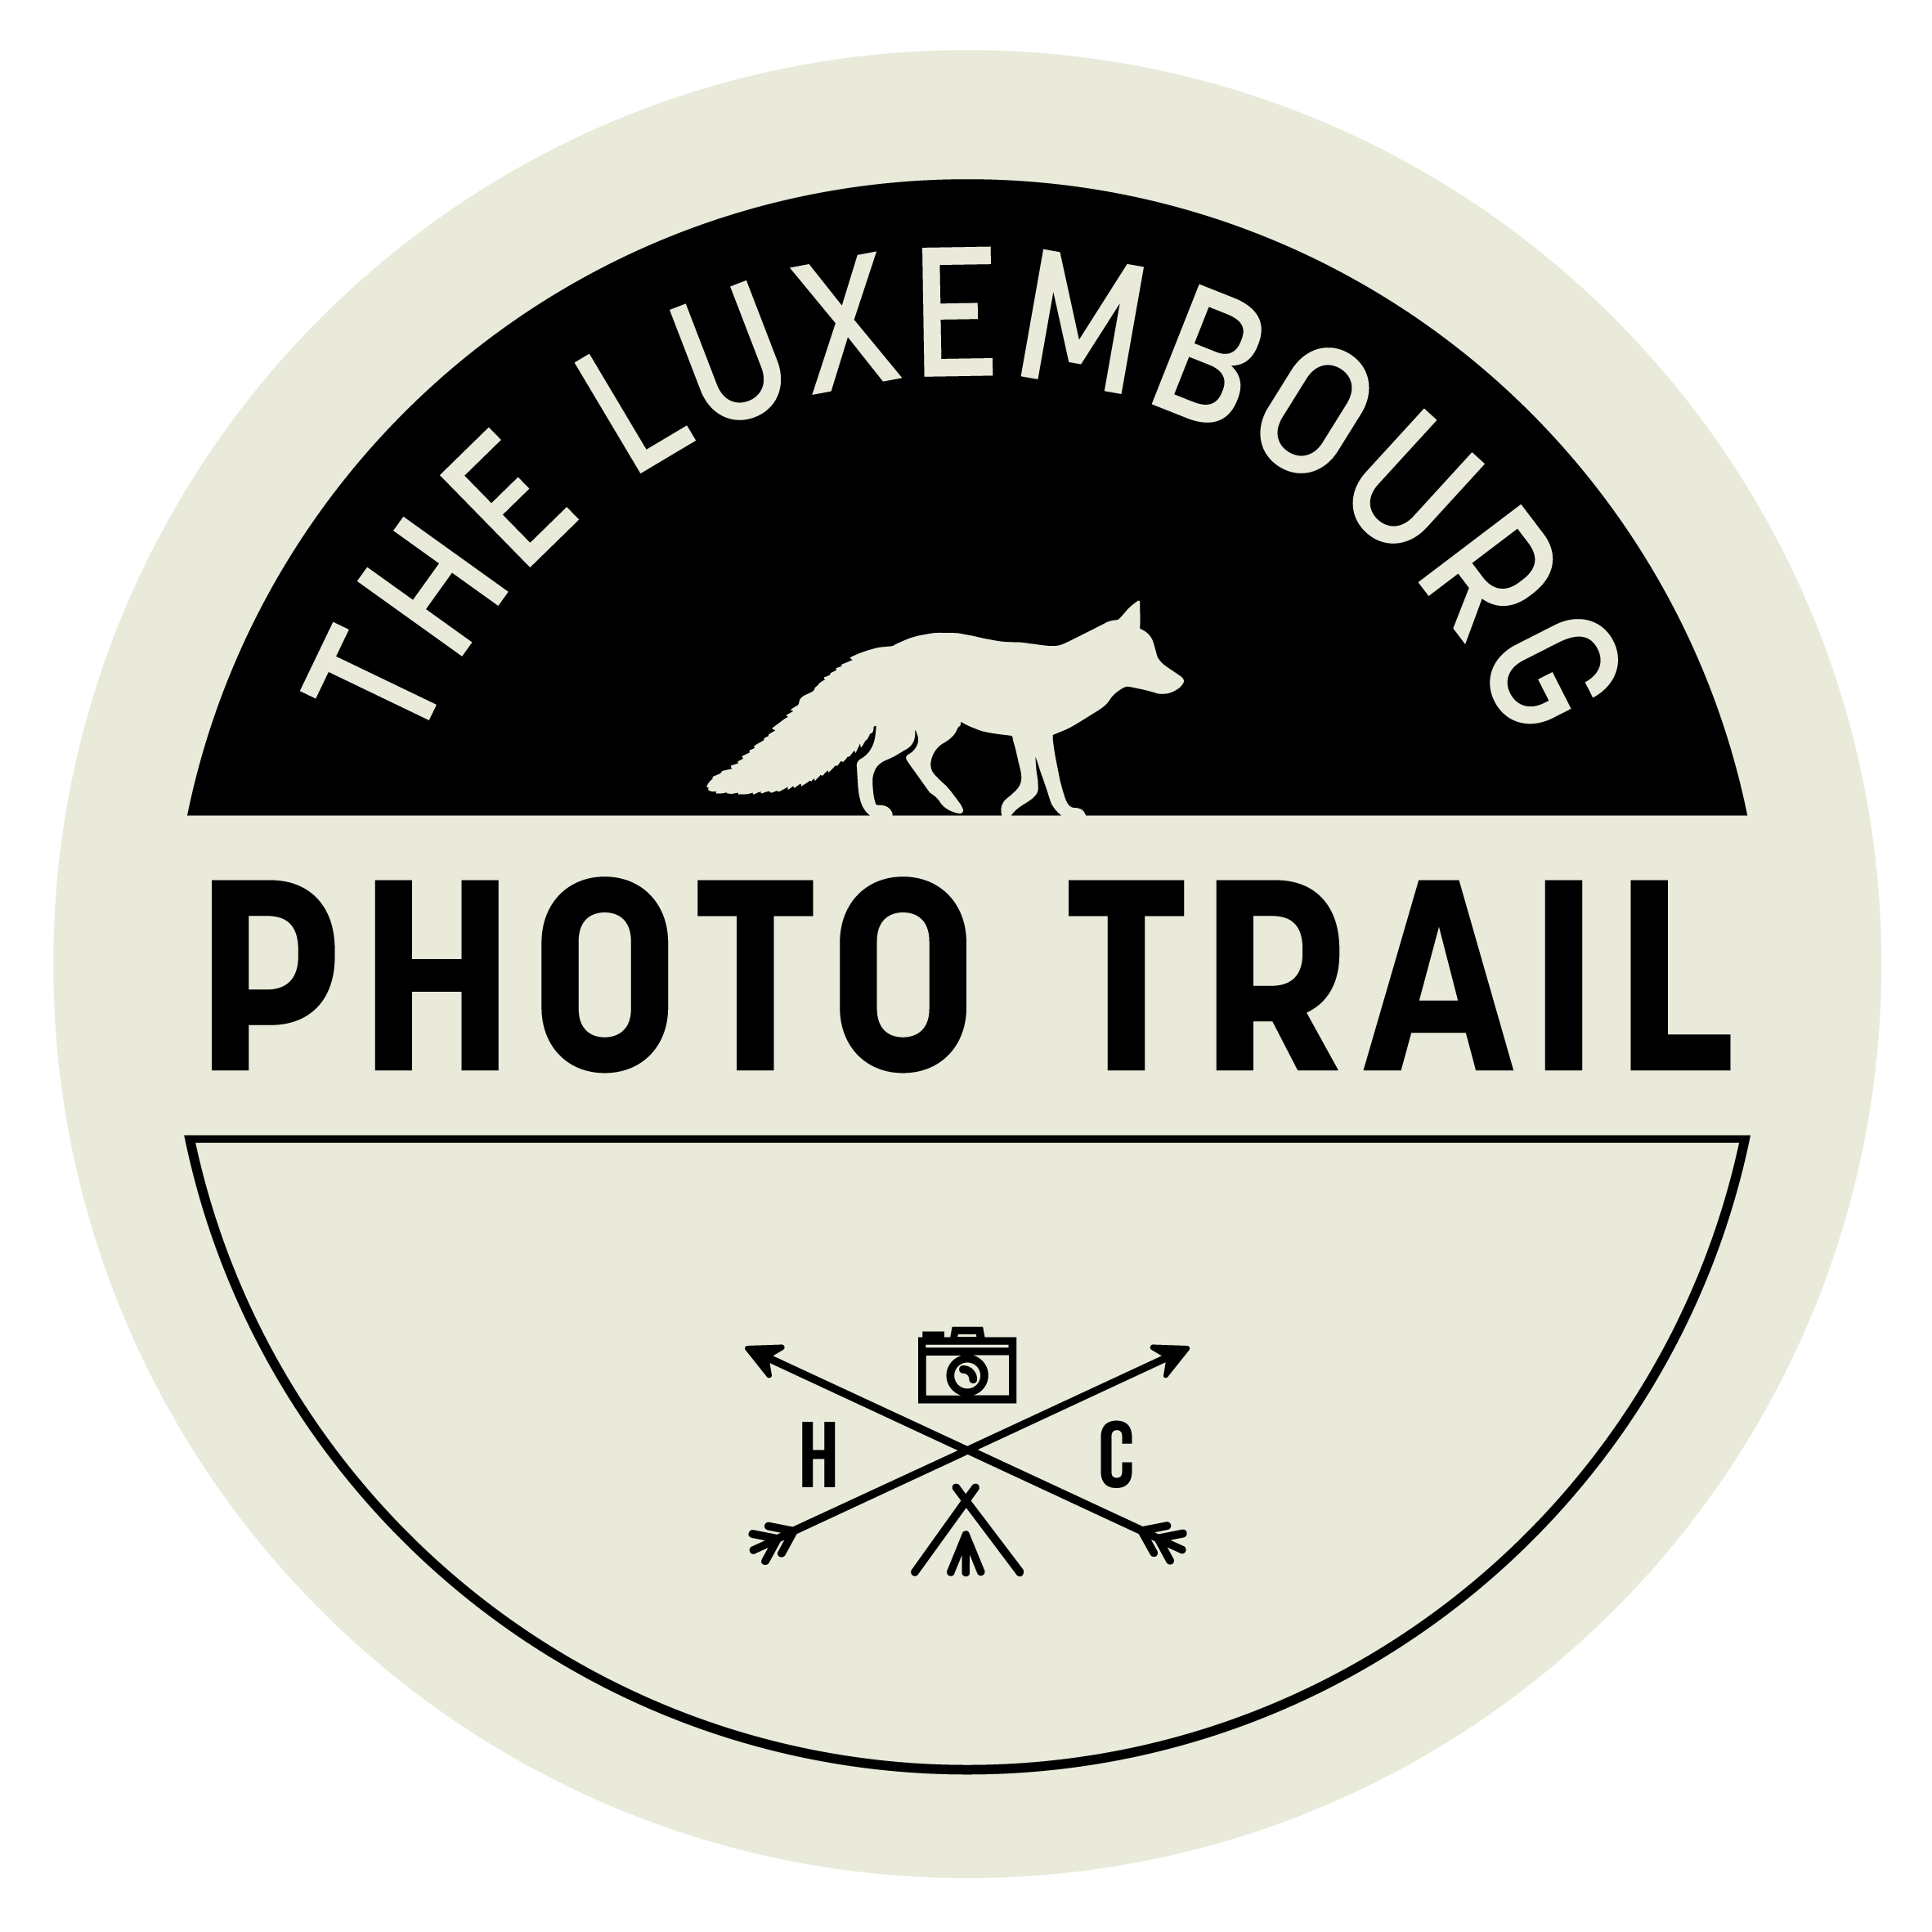 The Luxembourg Photo Trail